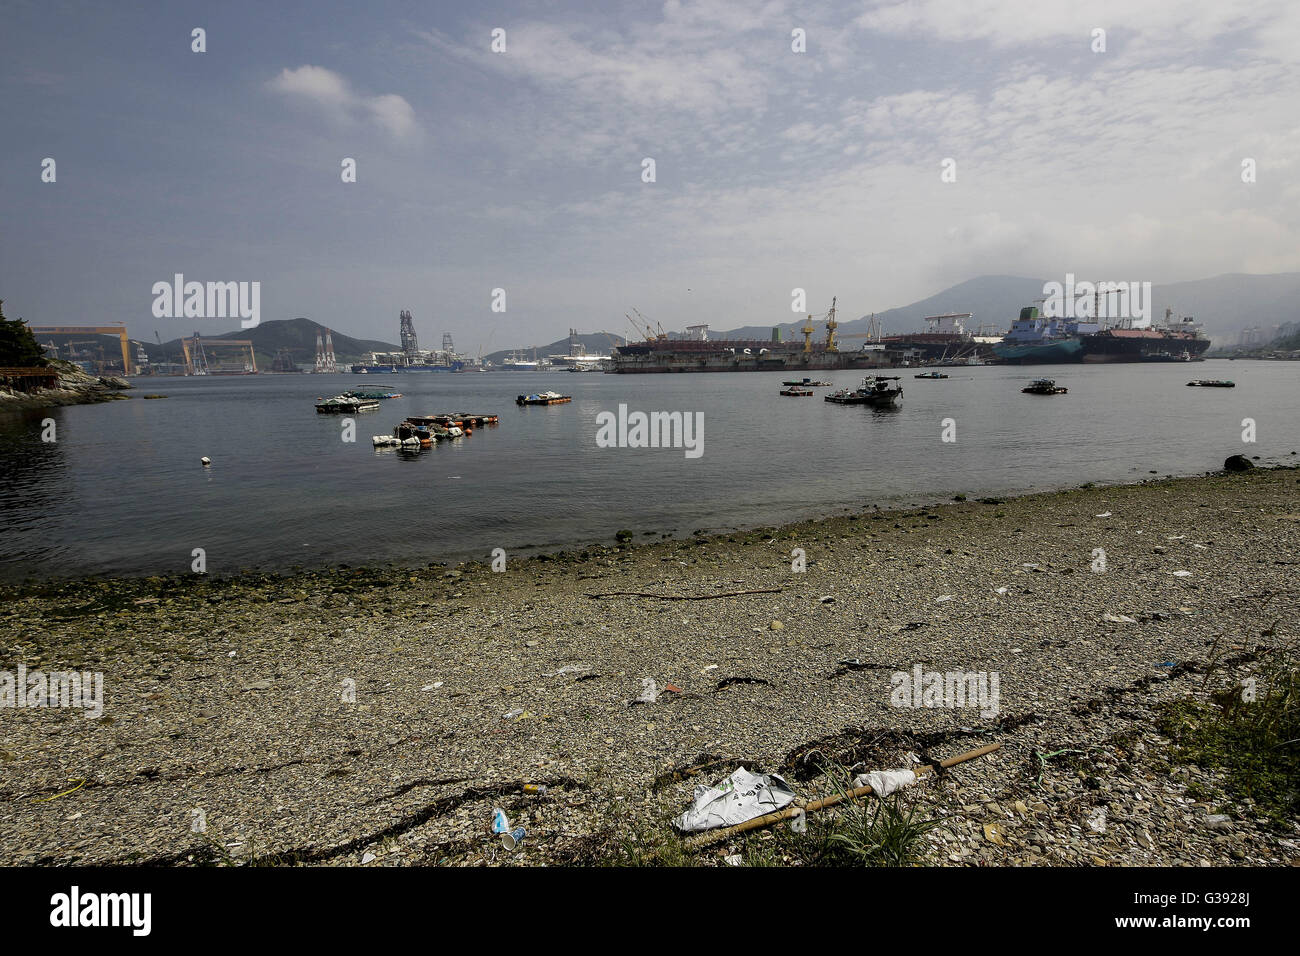 Geoje, Gyeongnam, South Korea. 7th June, 2016. View of DSME Shipbuilding yard in Geoje, South Korea. Shipbuilding has been central to South Korea's economy since the 1970s. Ships accounted for 8.5 percent of the country's total exports through June 20 of October 2015, according to the trade ministry. After more than a decade of global dominance, South Korea's shipbuilders face an unprecedented crisis that threatens the very survival of one of the flagship industries of Asia's fourth largest economy. Major South Korean shipbuilders plan to restructure their operations in earnest amid uncertain Stock Photo